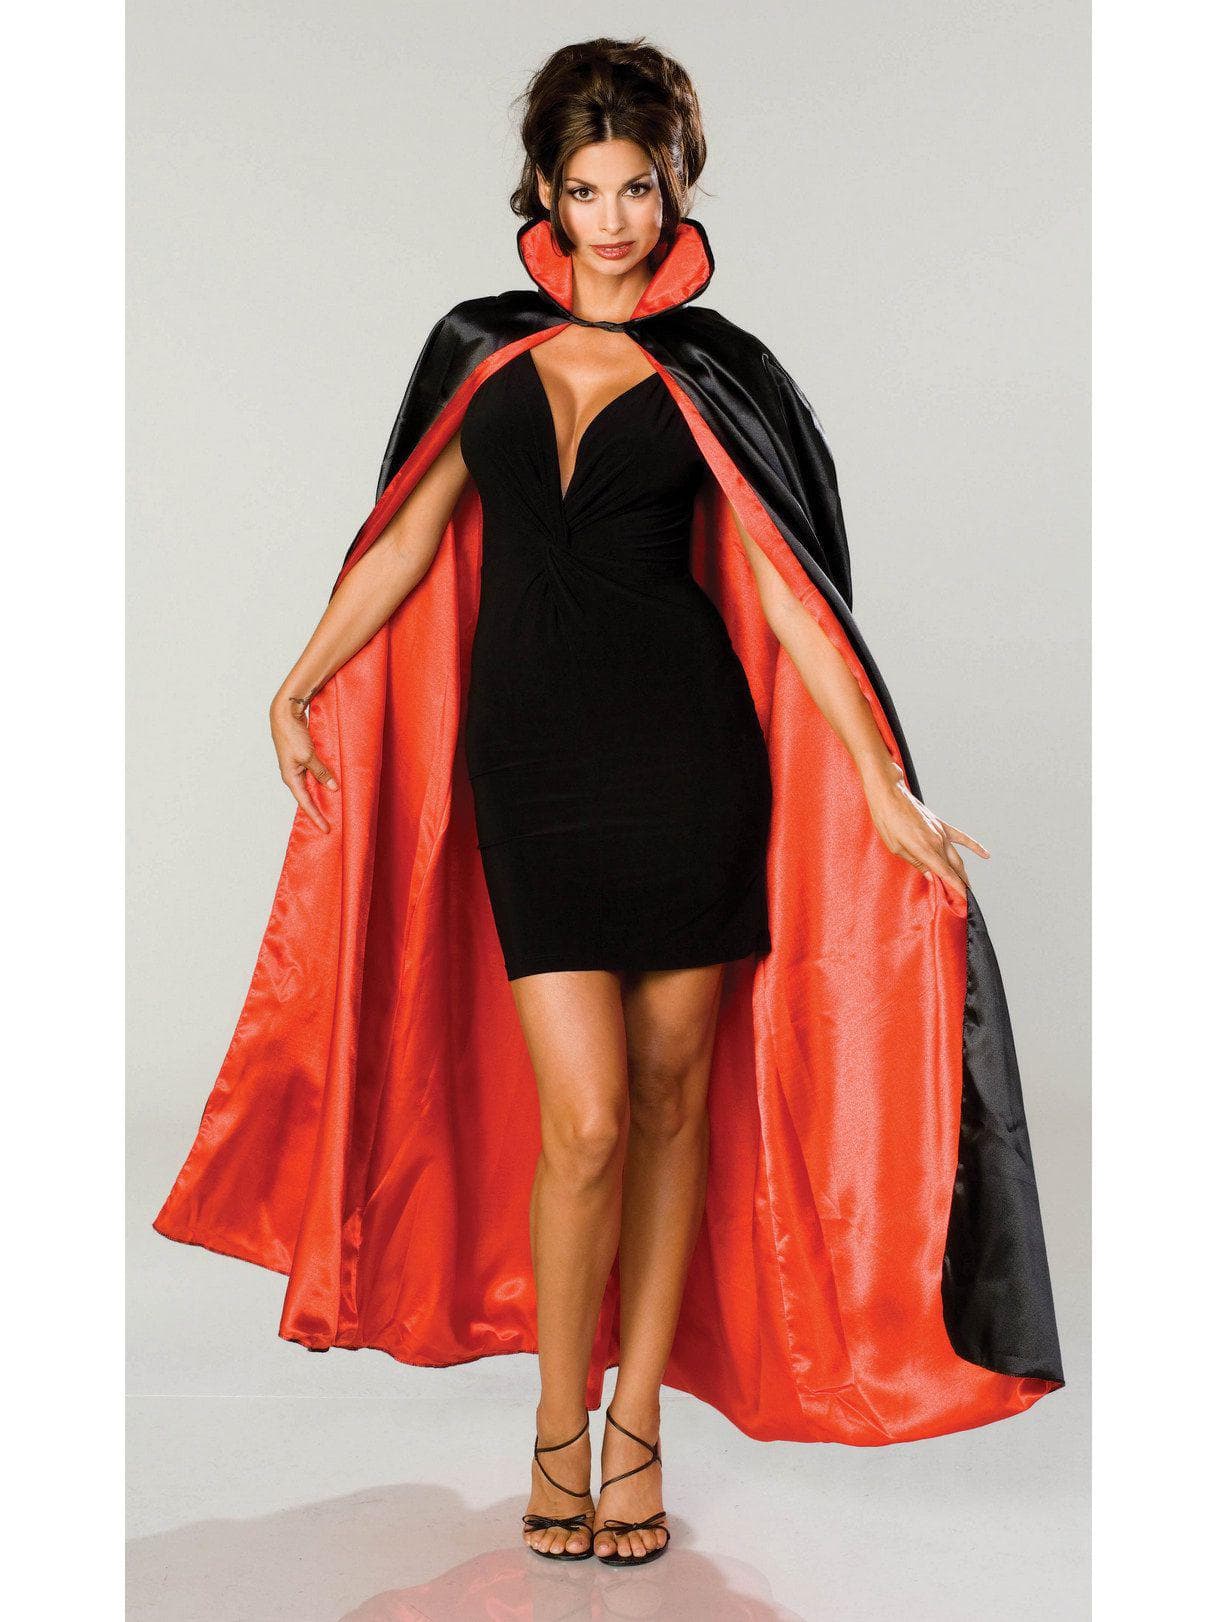 Adult Red and Black Vampire Cape - costumes.com